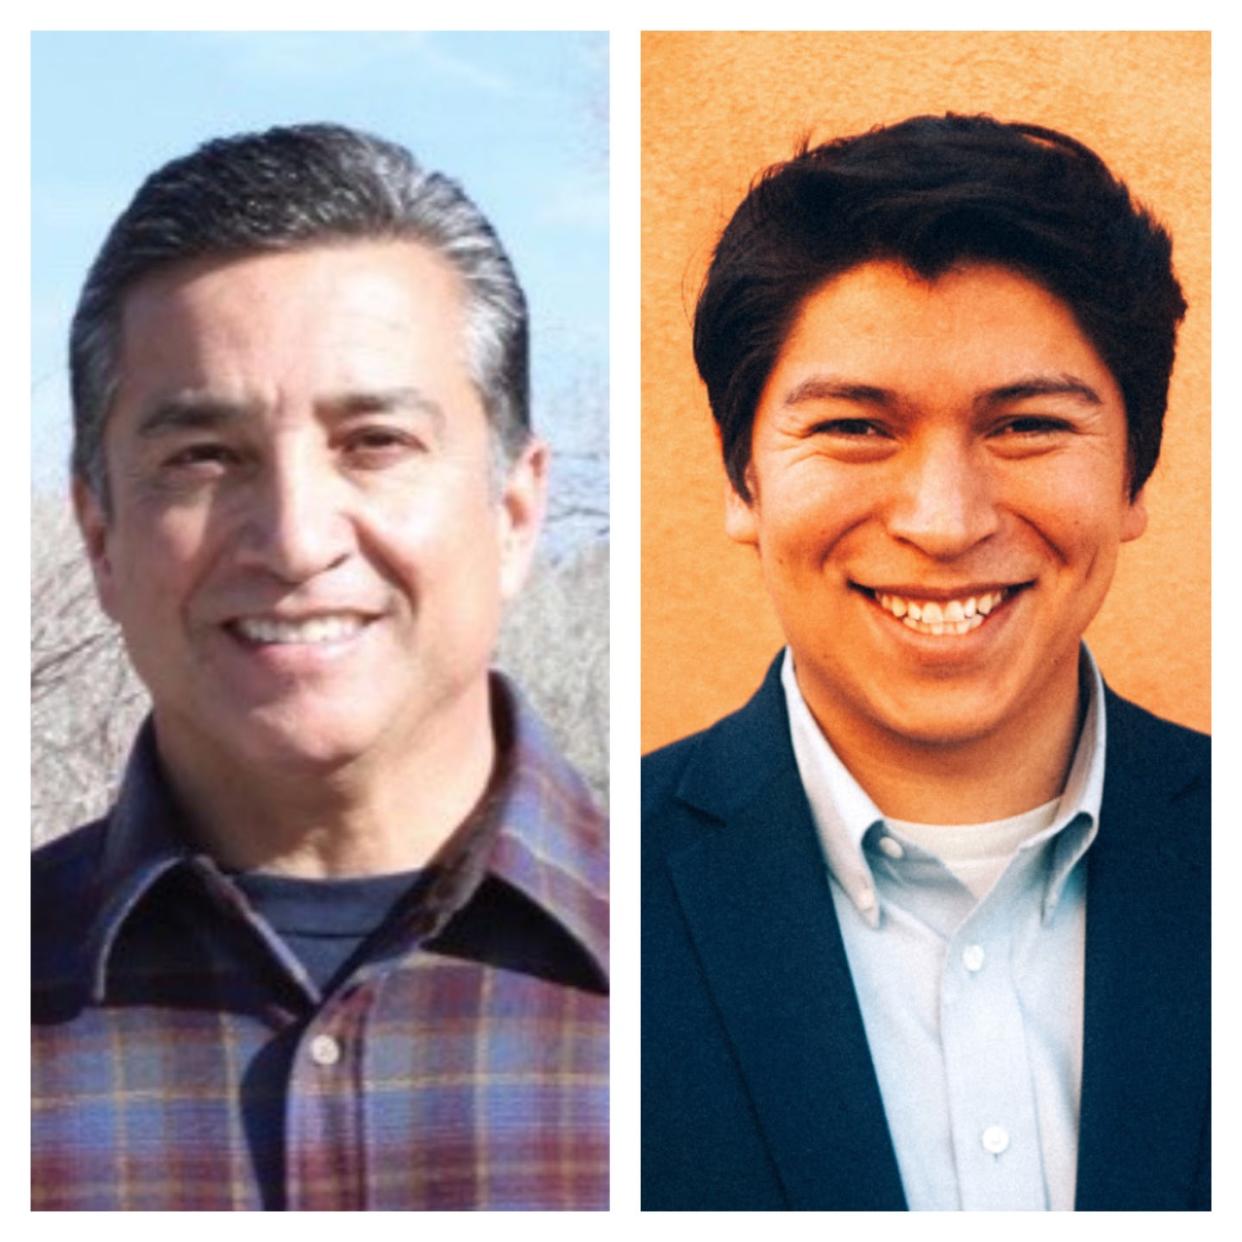 New Mexico Democratic primary candidates Joseph Maestas, left, and  Zack Quintero, right, are running for the nomination for office of State Auditor on June 7, 2022.